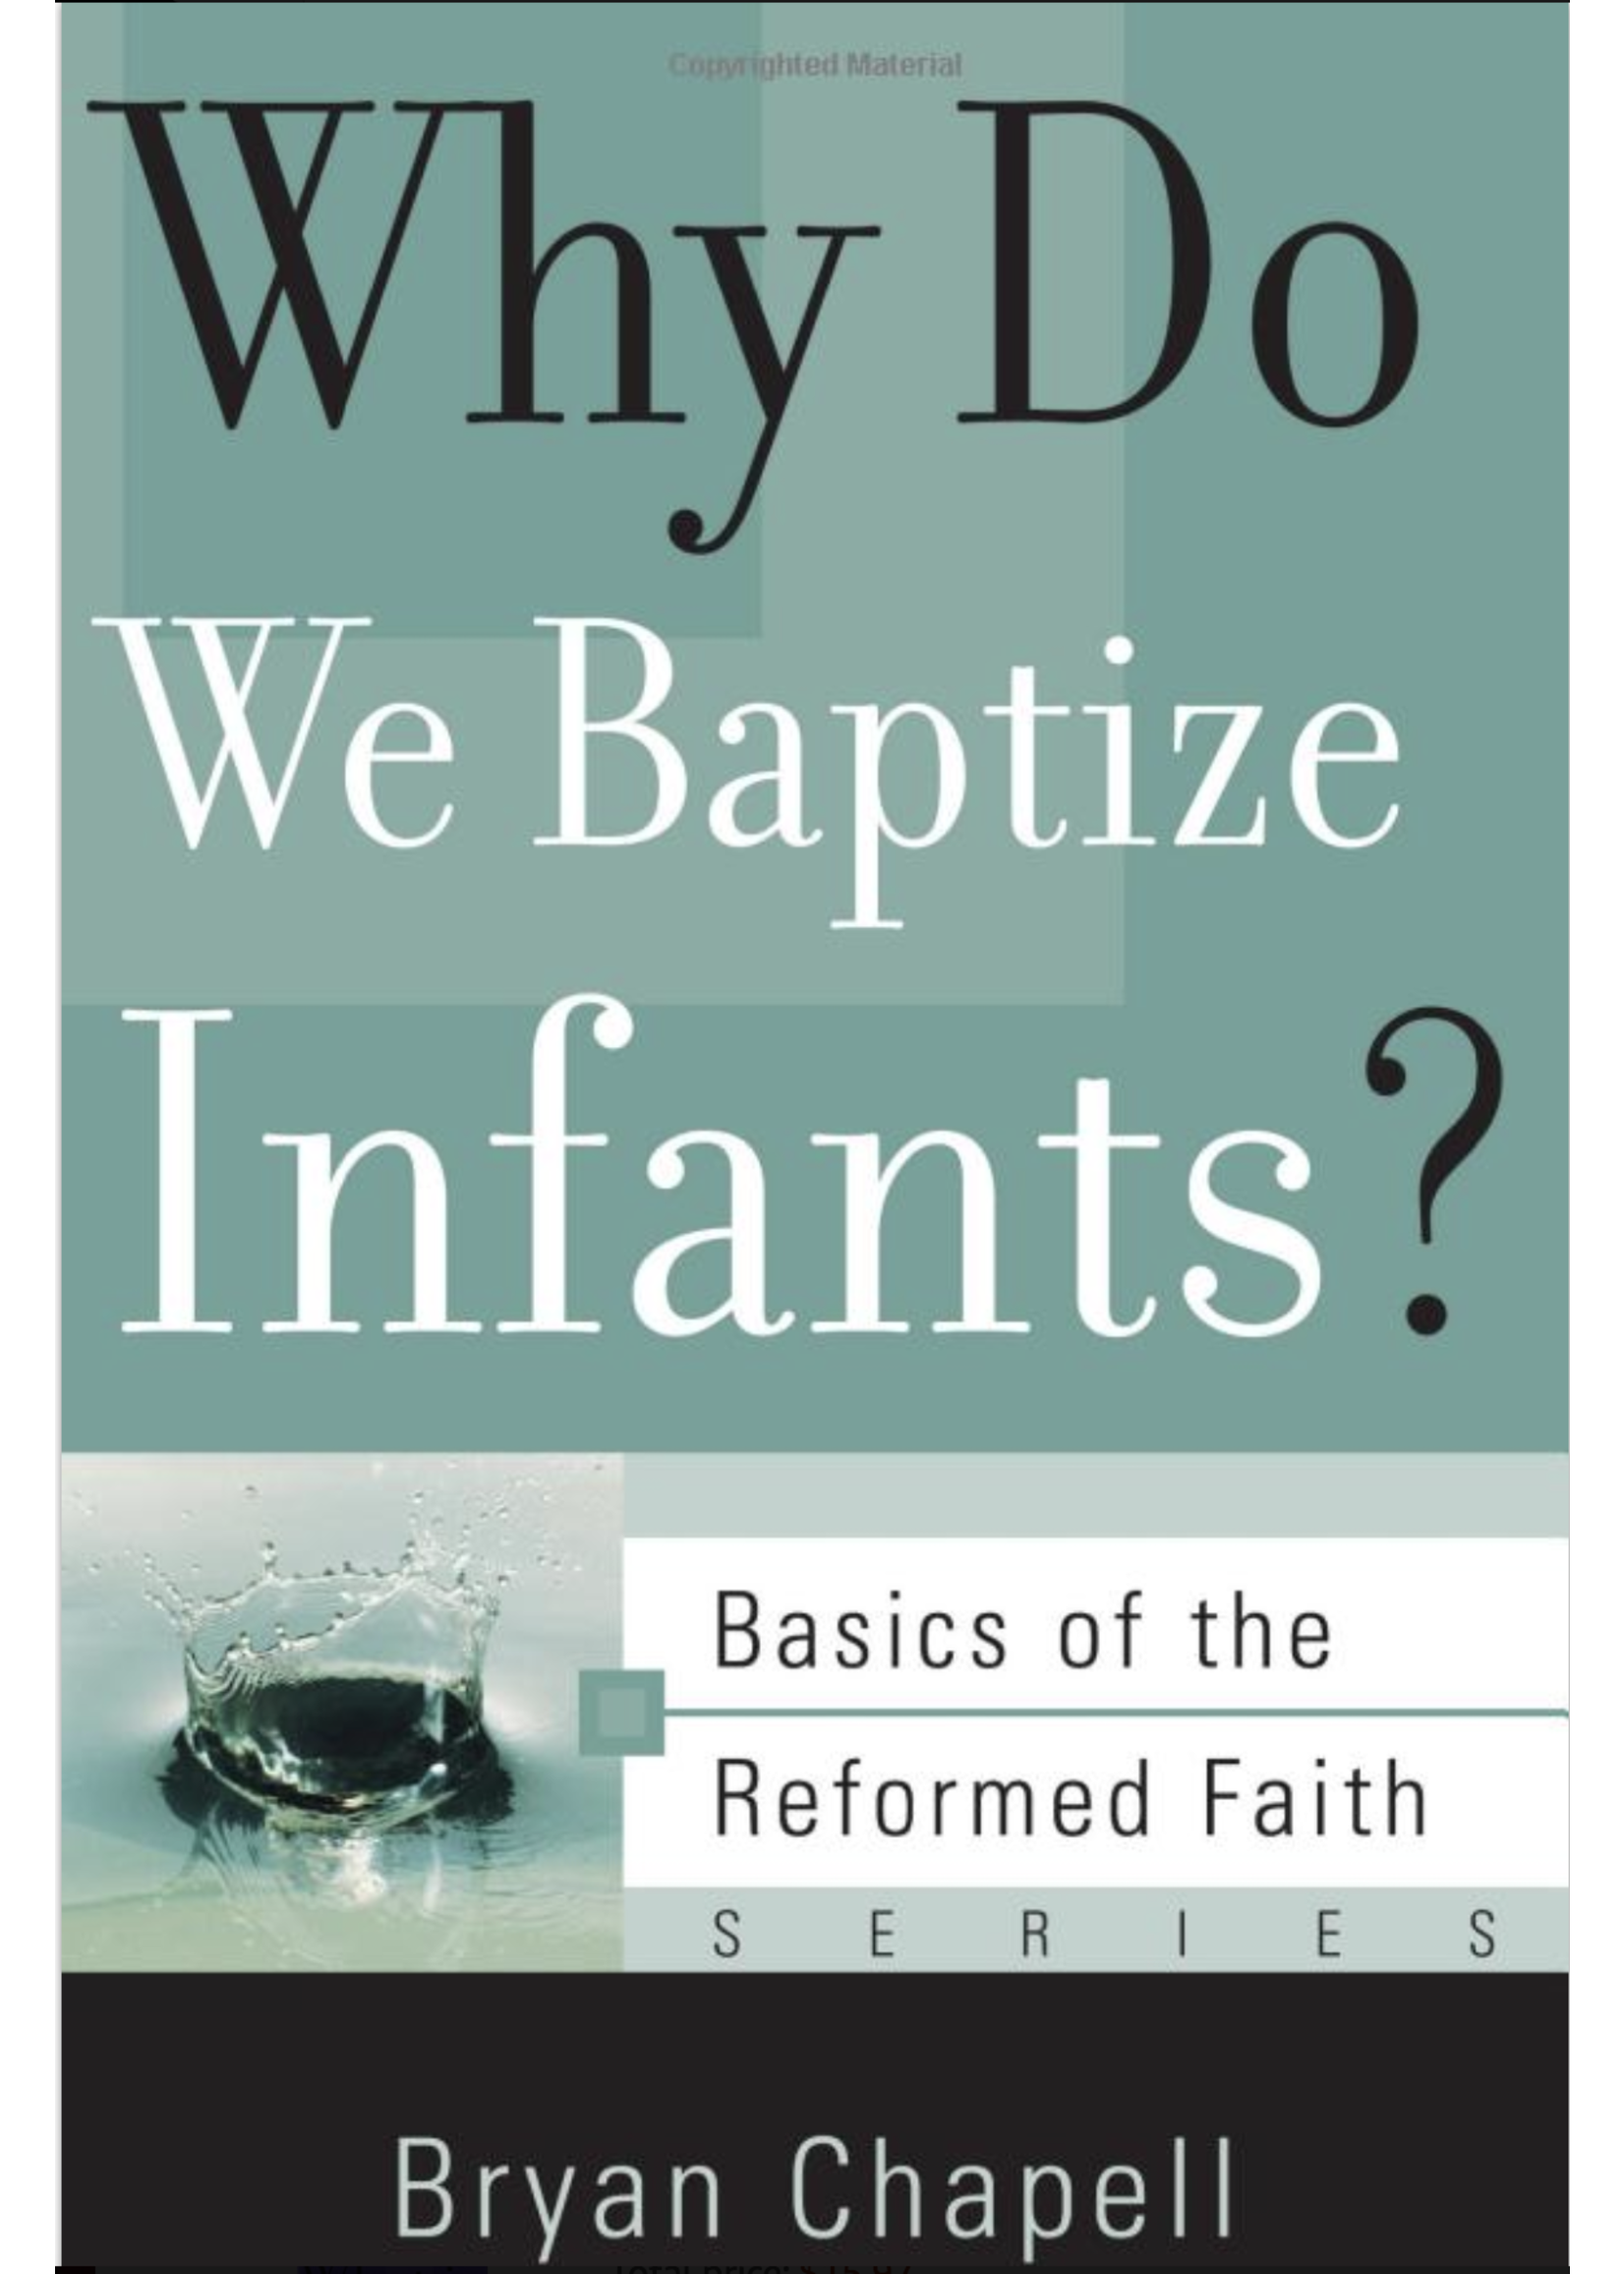 CHAPELL, BRYAN Why Do We Baptize Infants? (Basics of the Reformed Faith)